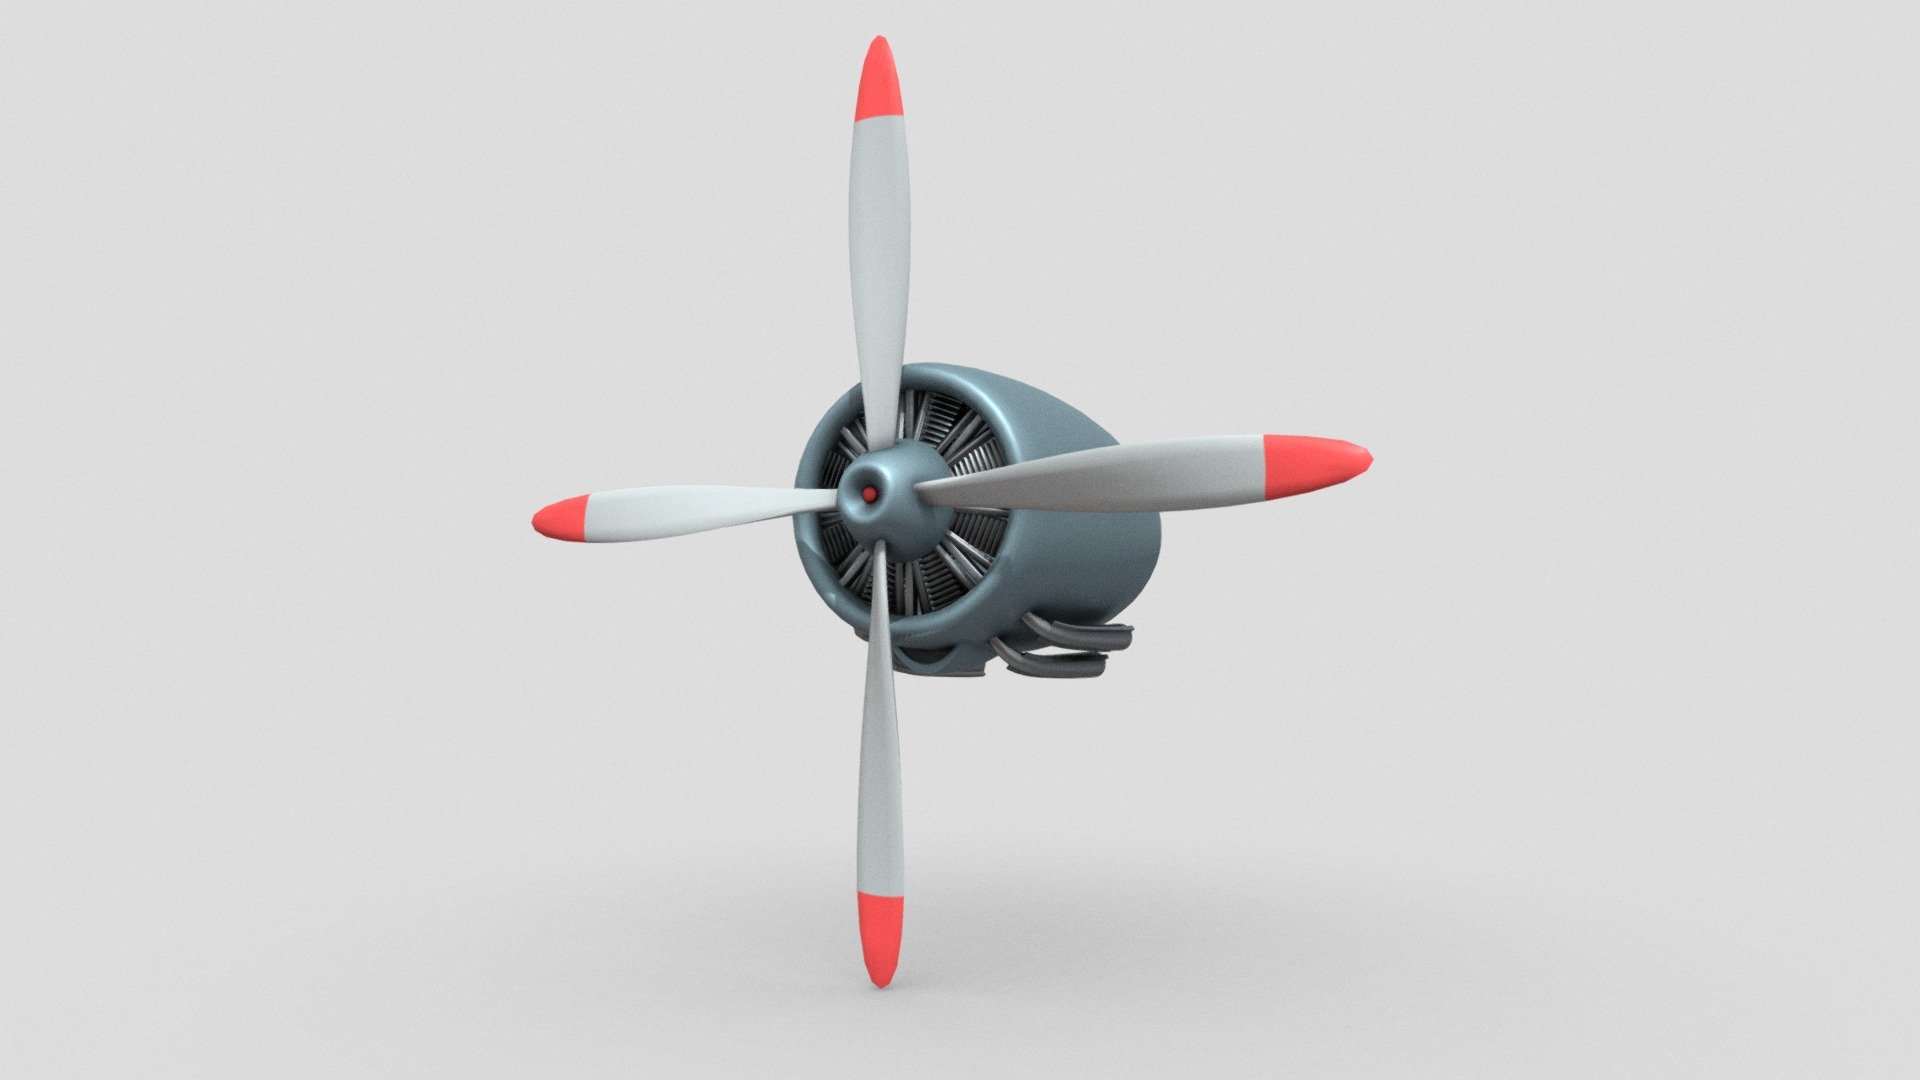 This is a Game ready low poly model of a Aircraft engine

This model is suitable for use in (game engines, broadcast, high-res film closeups, advertising, animations, visualizations)

FEATURES:

-High-quality polygonal model
-Models resolutions are optimized for polygon efficiency
-Model is fully textured with all materials applied (V-ray) &amp;(Scanline/pbr)
-No special plugin needed to open scene.
-Fully Unwrapped Uvs, non overllaping
-units used cm

File Formats:

OBJ

TEXTURES
4096x4096 color normal metal rough (pbr) - Plane Engine - Buy Royalty Free 3D model by Pbr_Studio (@pbr.game.ready) 3d model